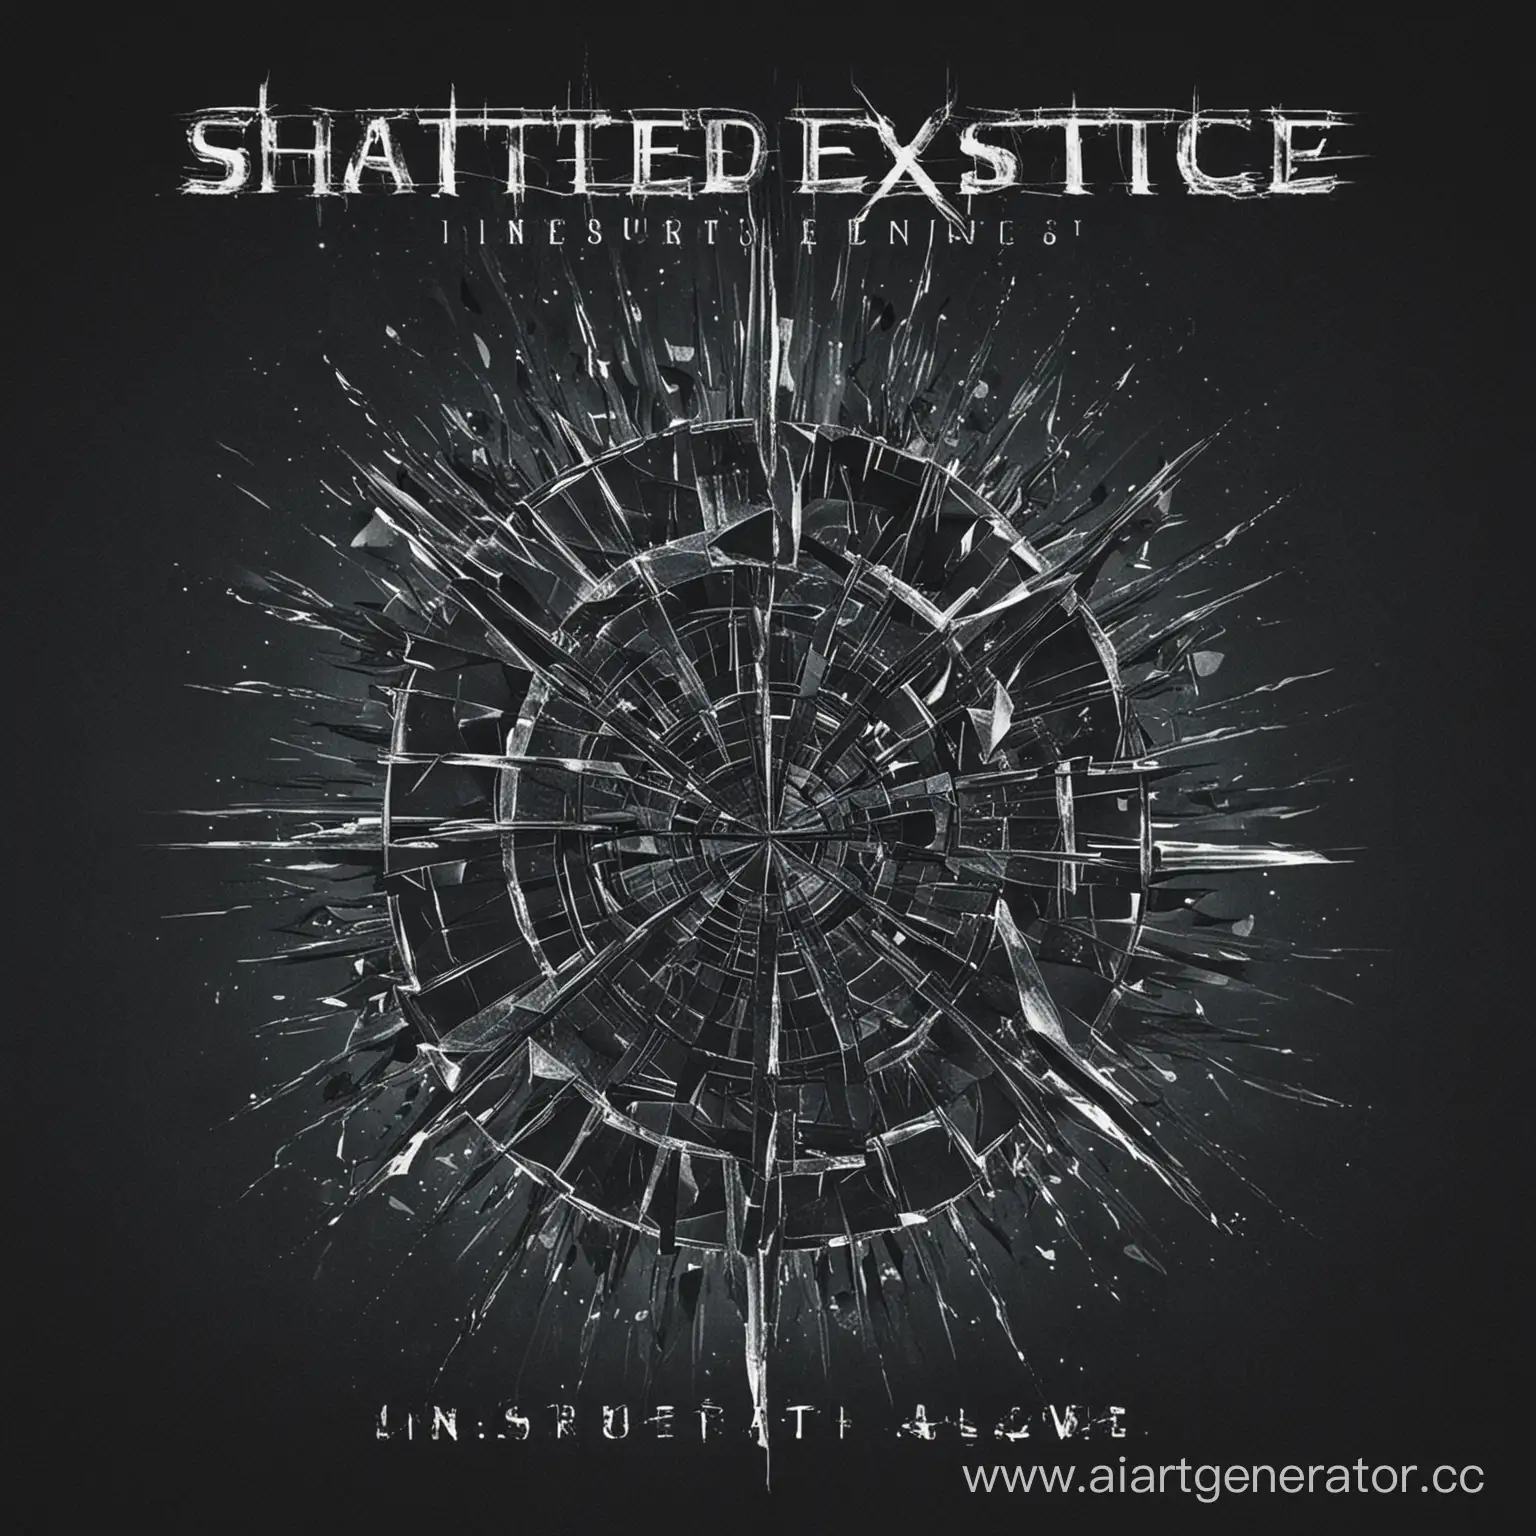 "Shattered Existence" instrumental rock music album. Simple style